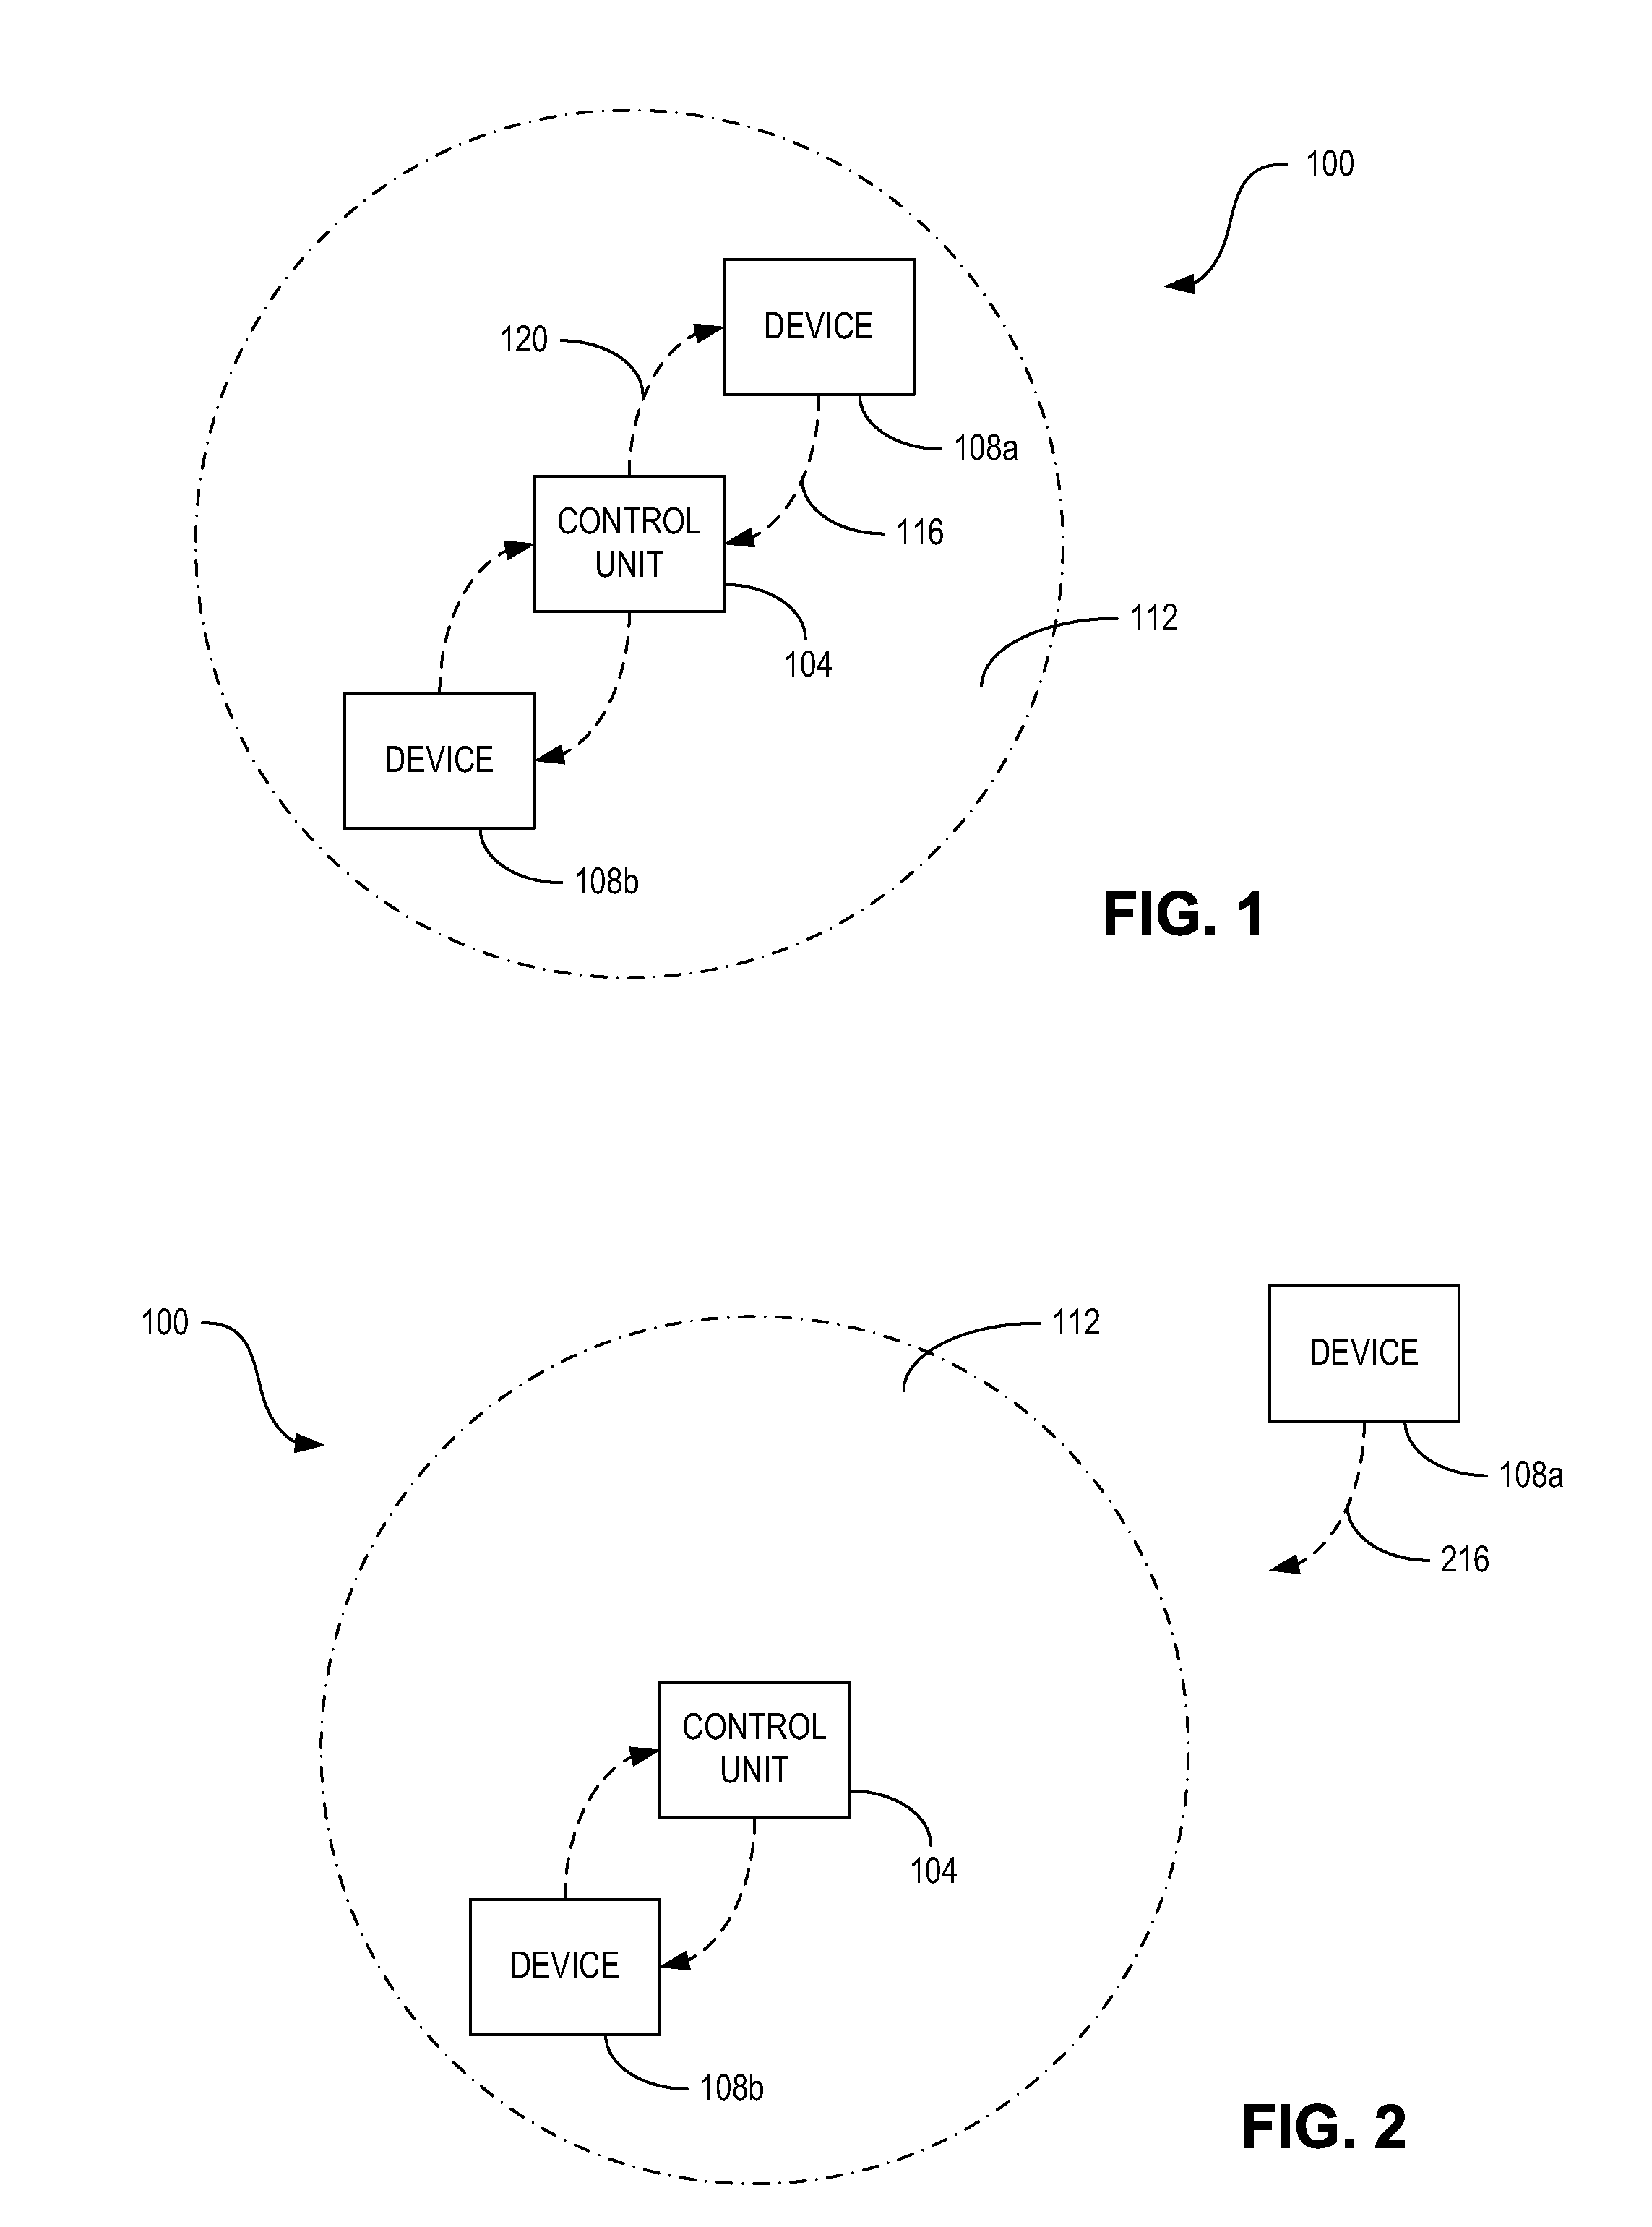 Method and apparatus for implementing a handheld security system